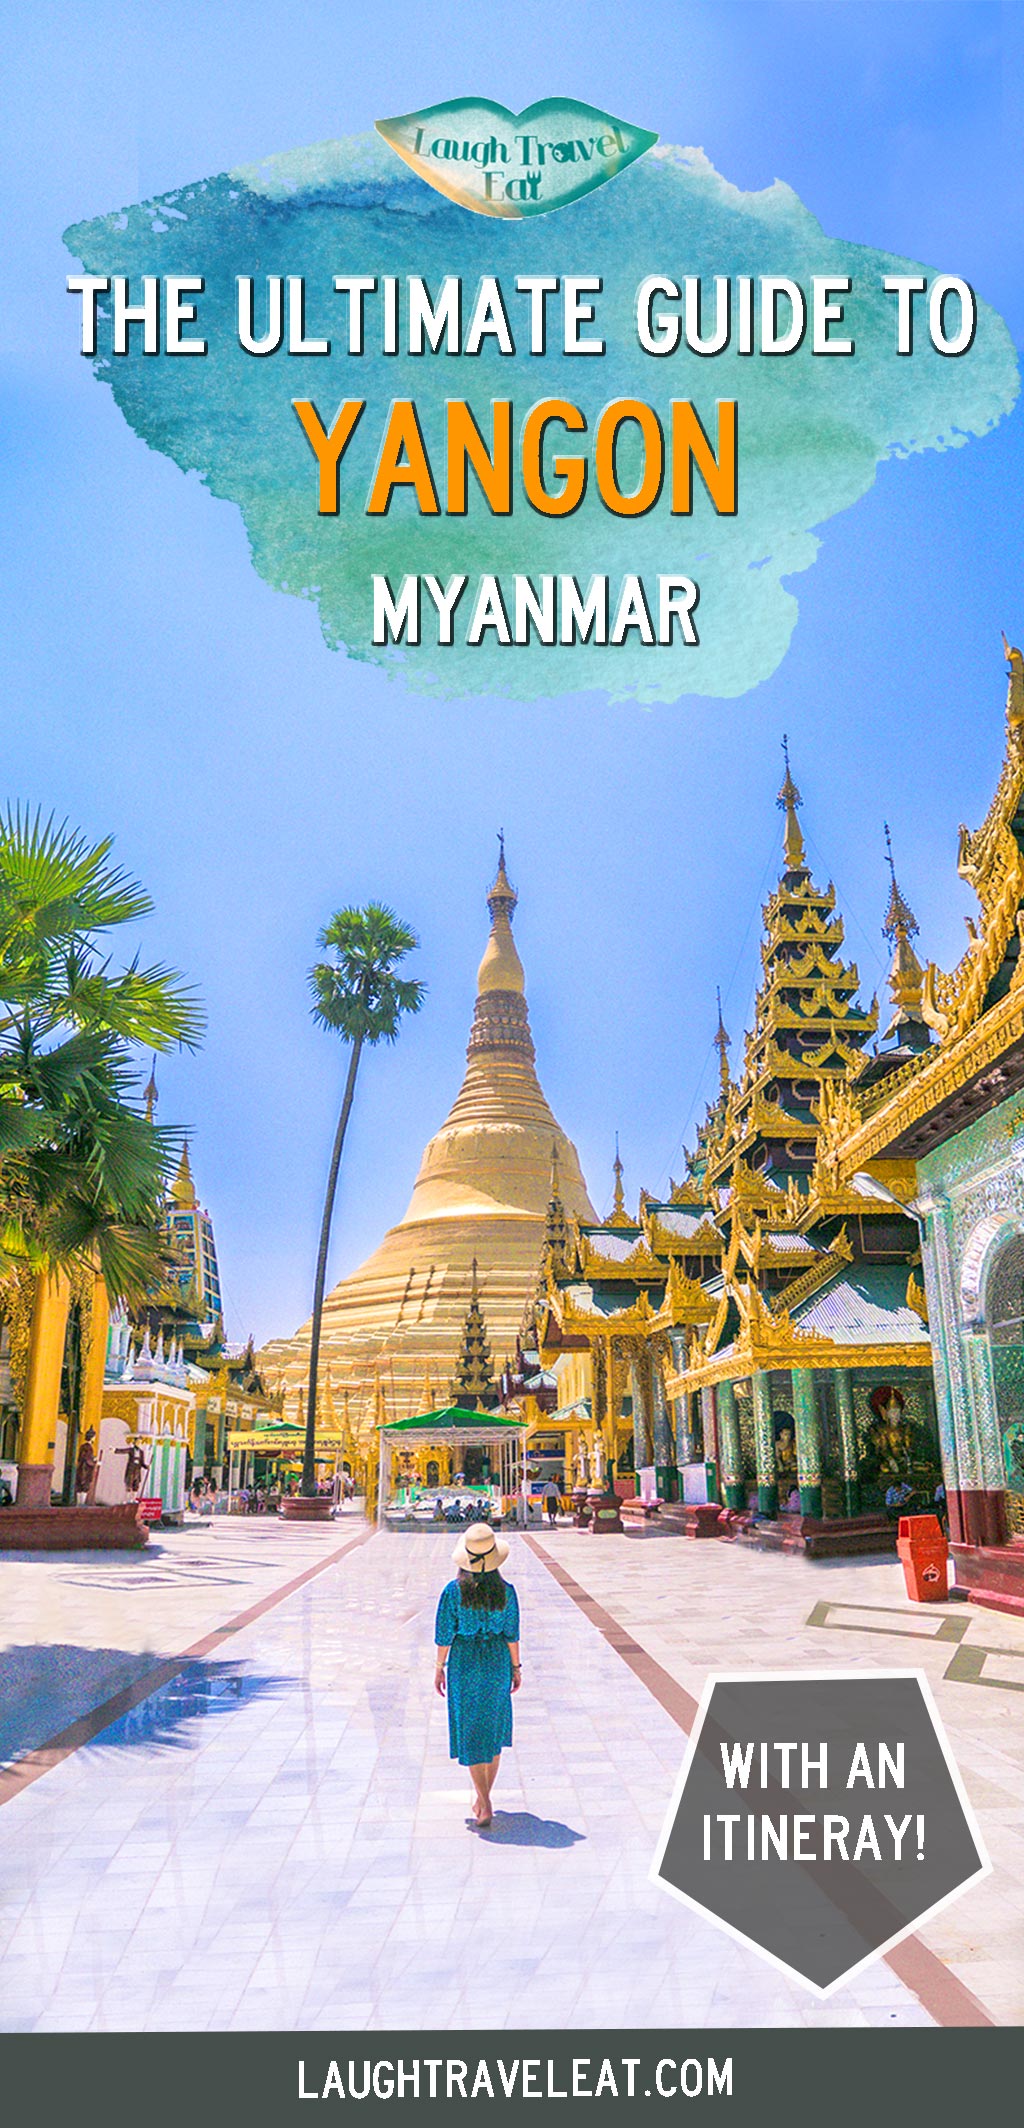 What is there to do in Yangon? Here is everything from the famous Shwedagon Pagoda and circular train to what to eat and where to stay! #yangon #shwedagon #myanmar